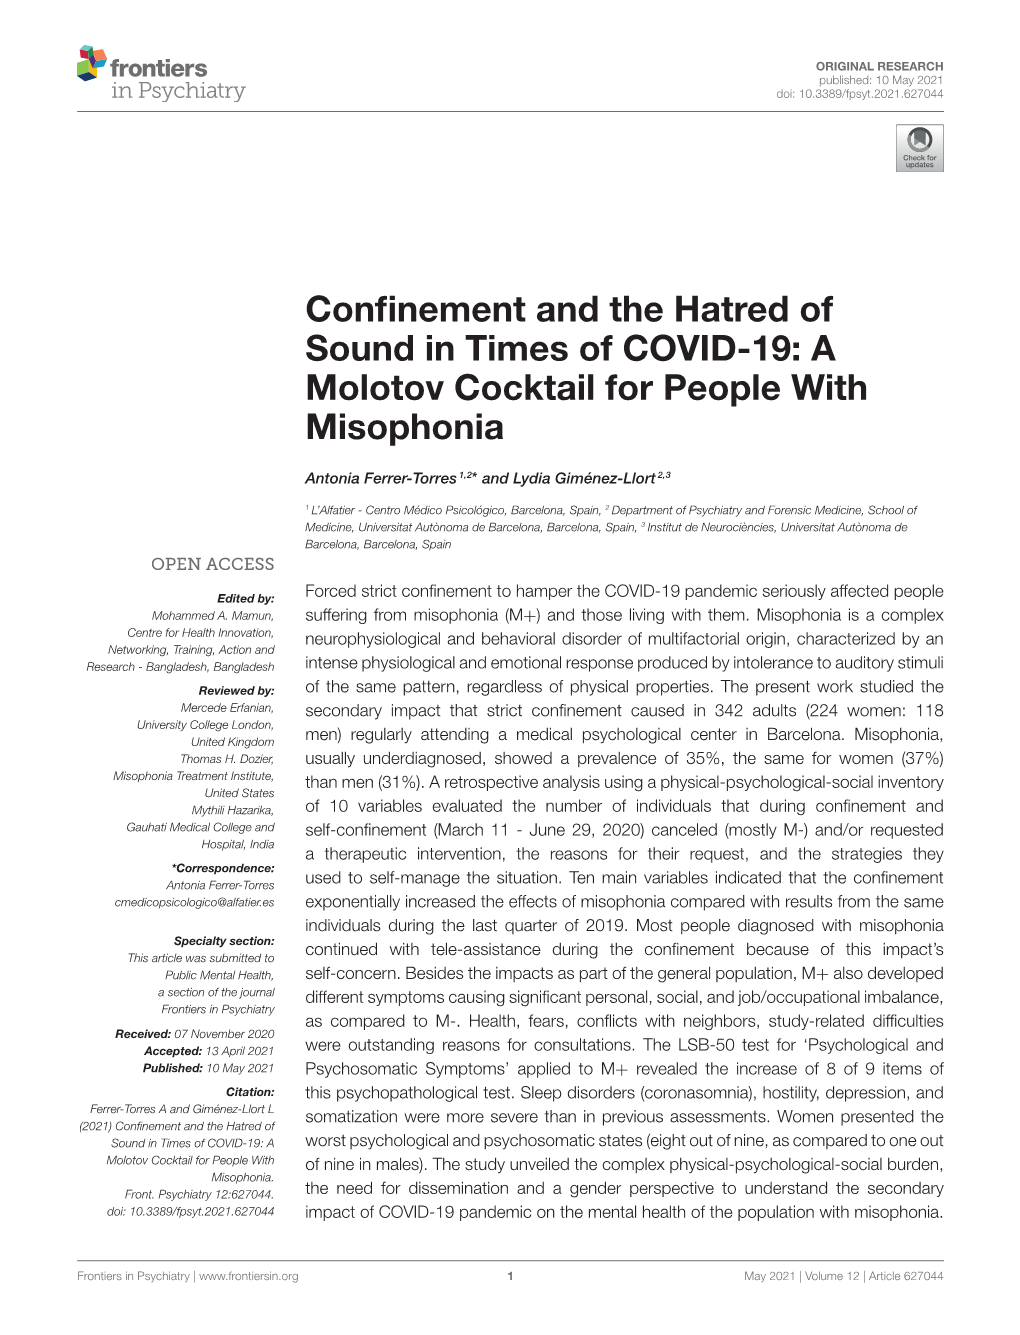 Confinement and the Hatred of Sound in Times of COVID-19: a Molotov